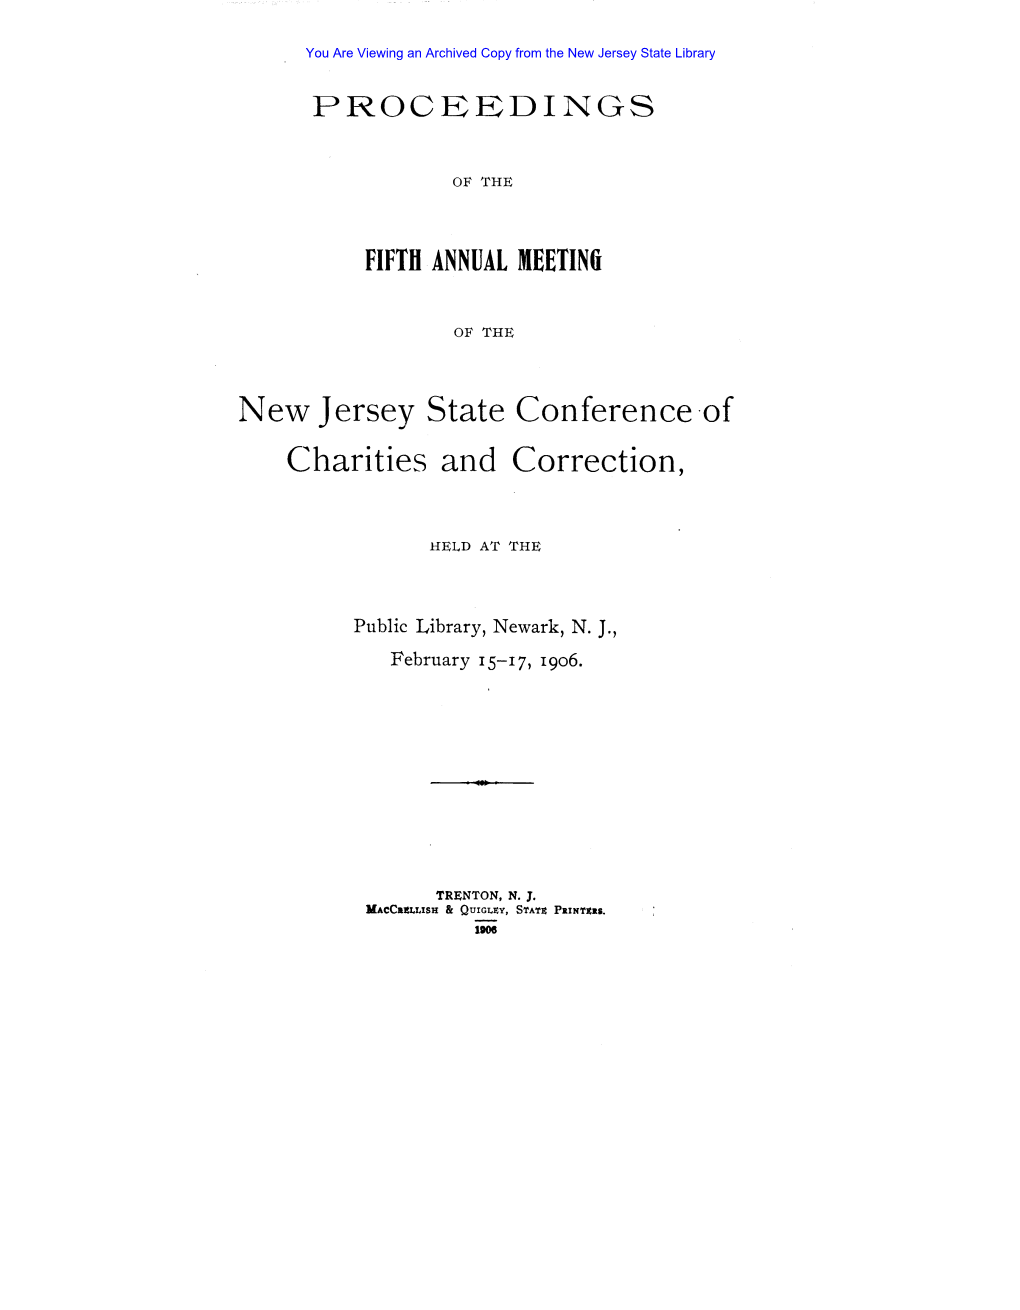 New Jersey State Conference ,Of Charities and Correction